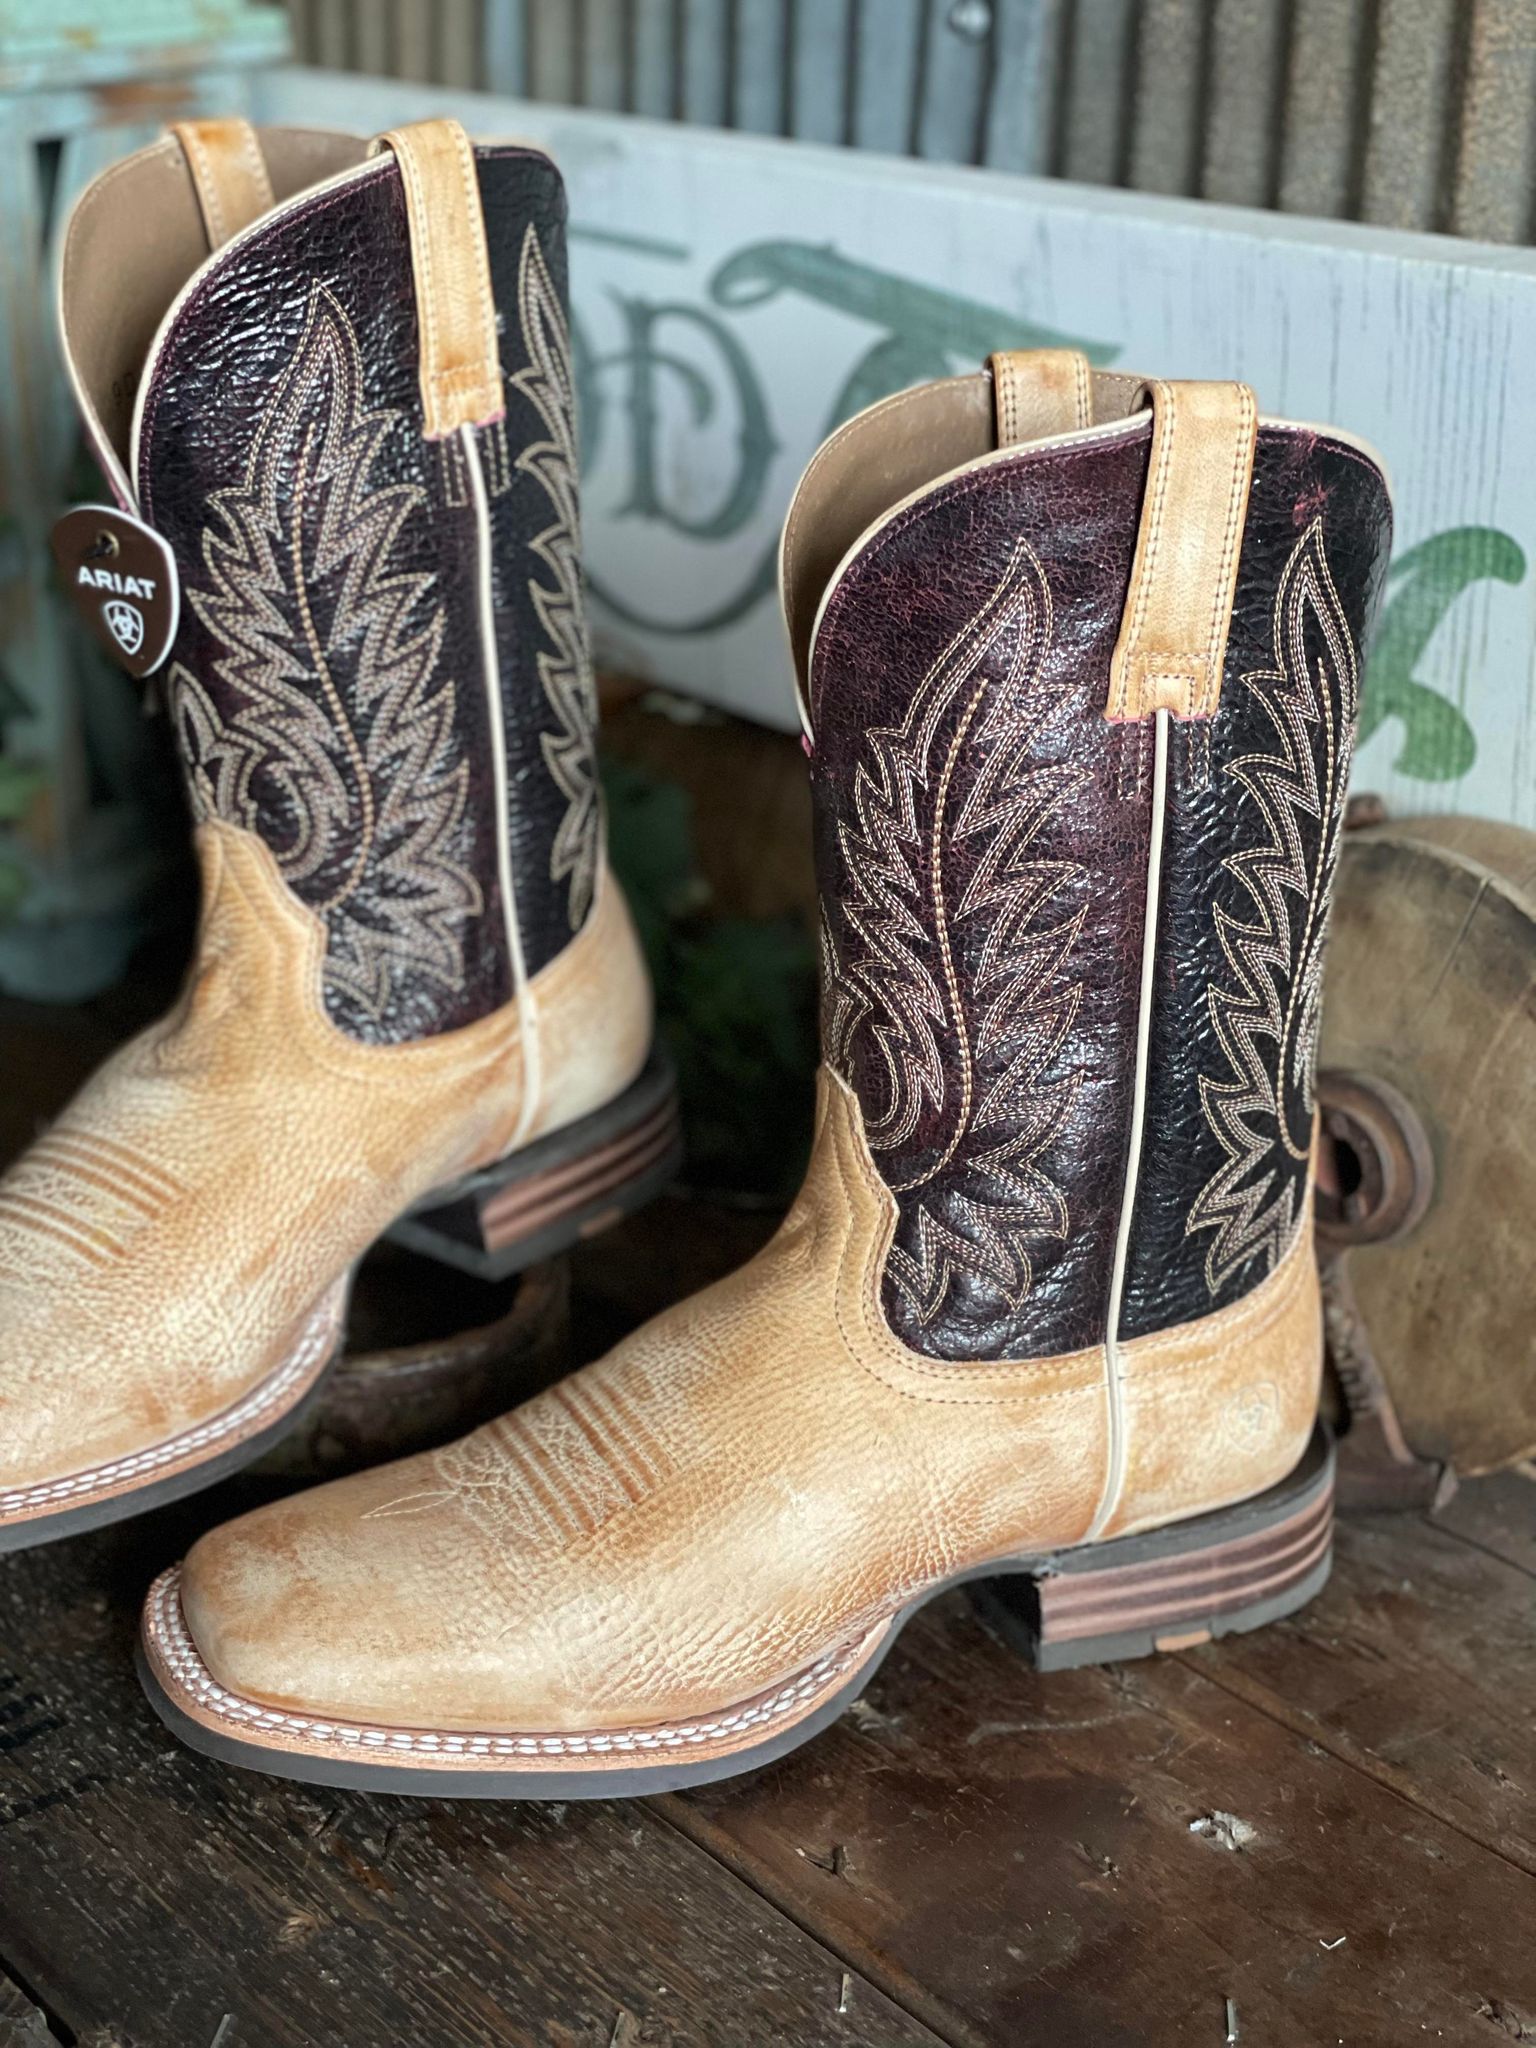 Men's Ariat Riding High Boots in Dessert Tan-Men's Boots-Ariat-Lucky J Boots & More, Women's, Men's, & Kids Western Store Located in Carthage, MO